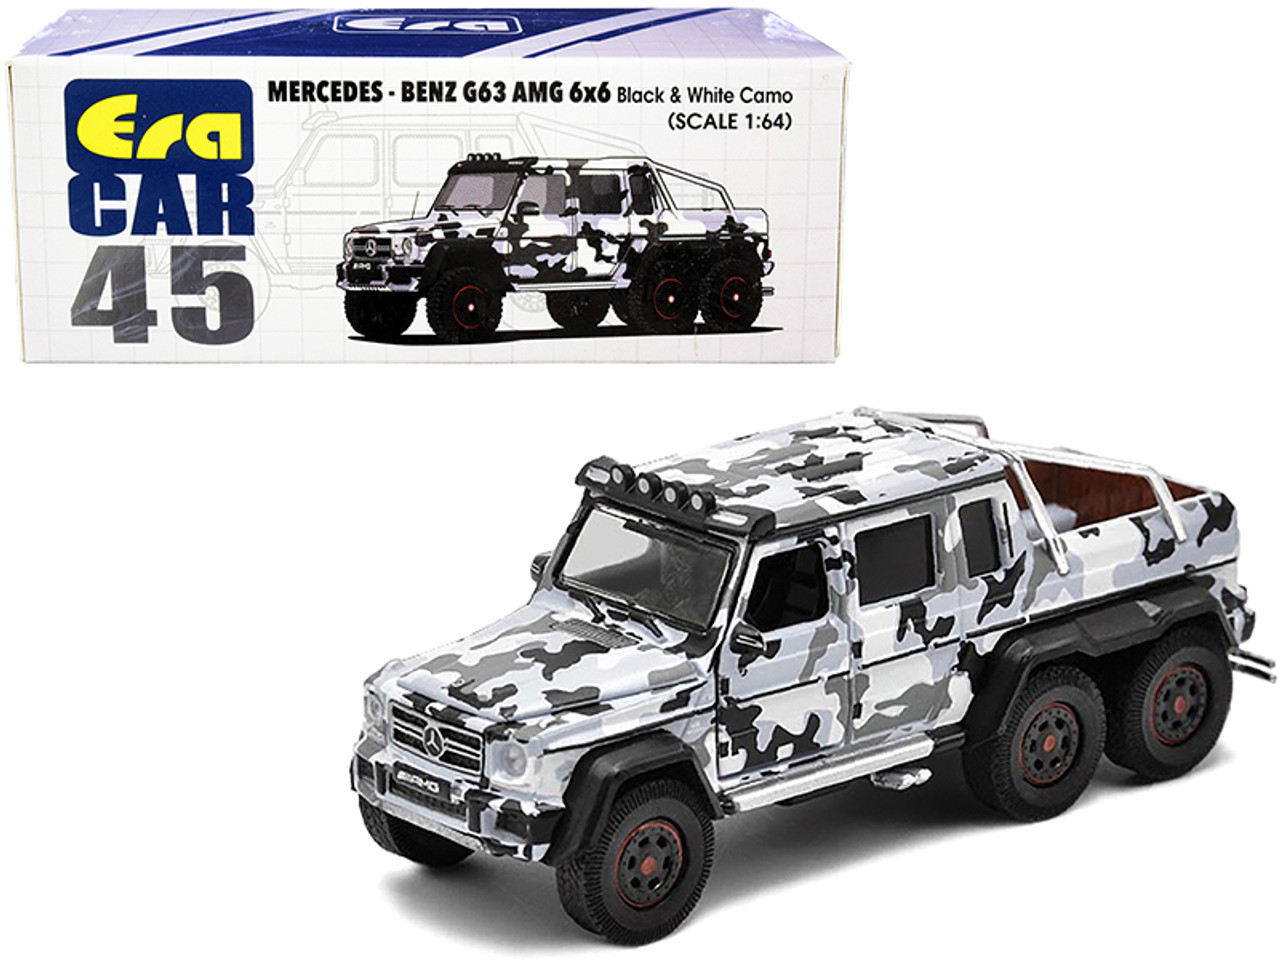 Mercedes Benz G63 AMG 6x6 Pickup Truck with Spotlight Black and White Camo 1/64 Diecast Model Car by Era Car